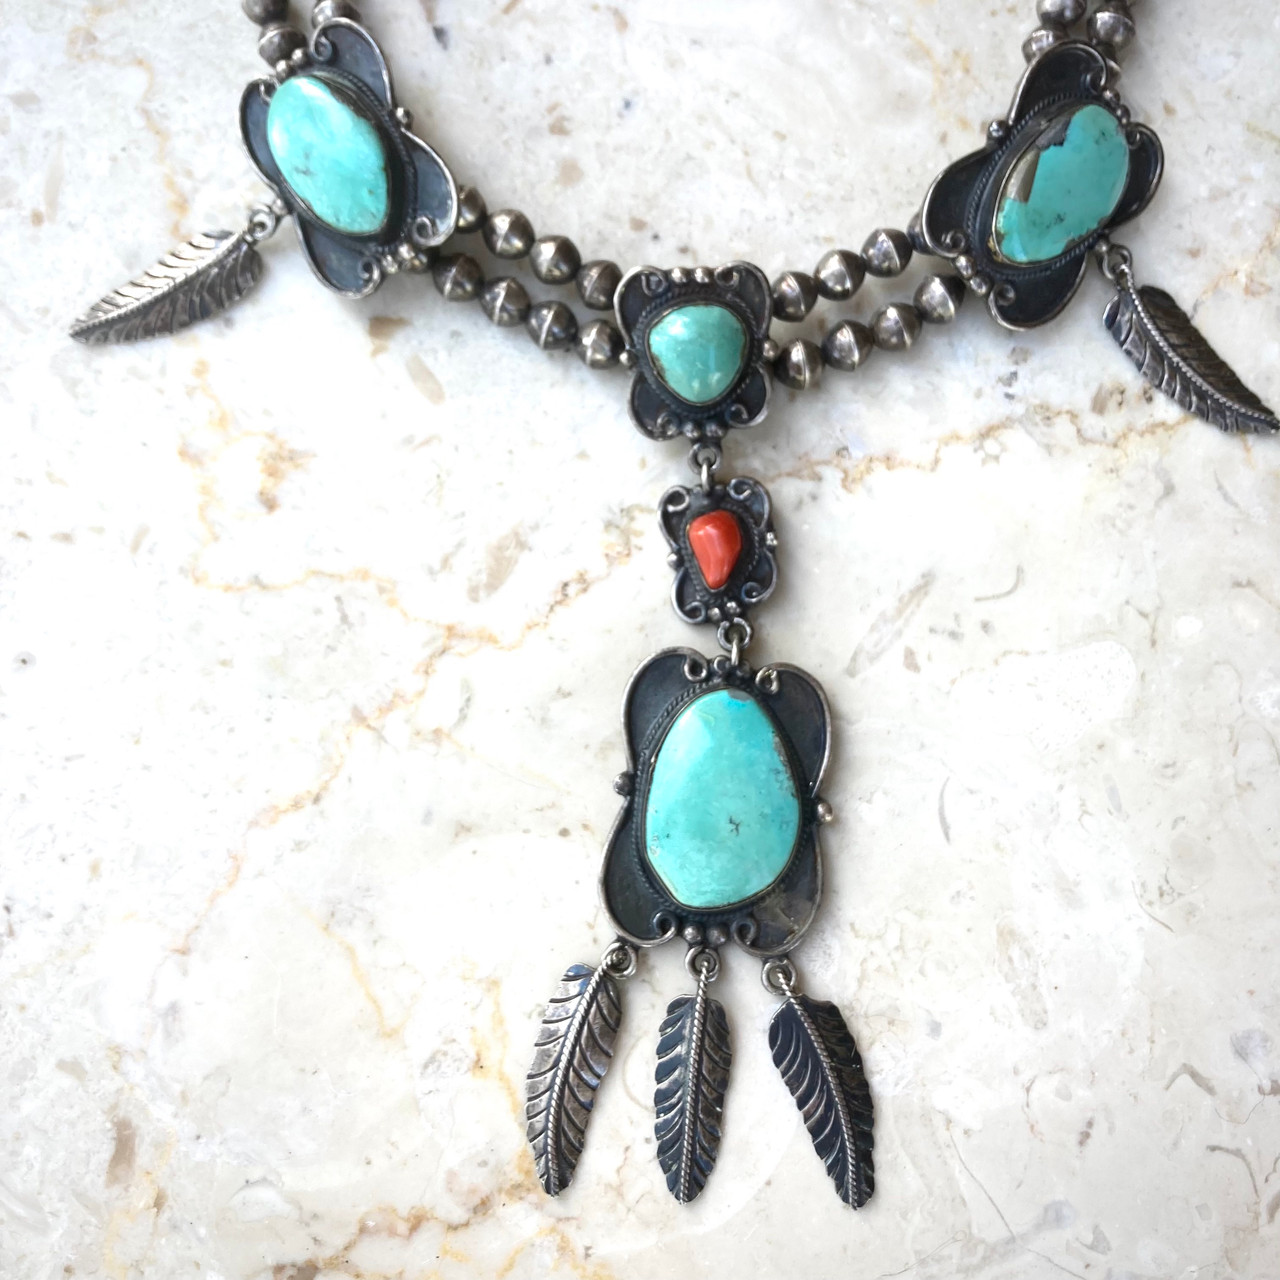 Navajo Indian Turquoise & Silver Pendant Necklace 20